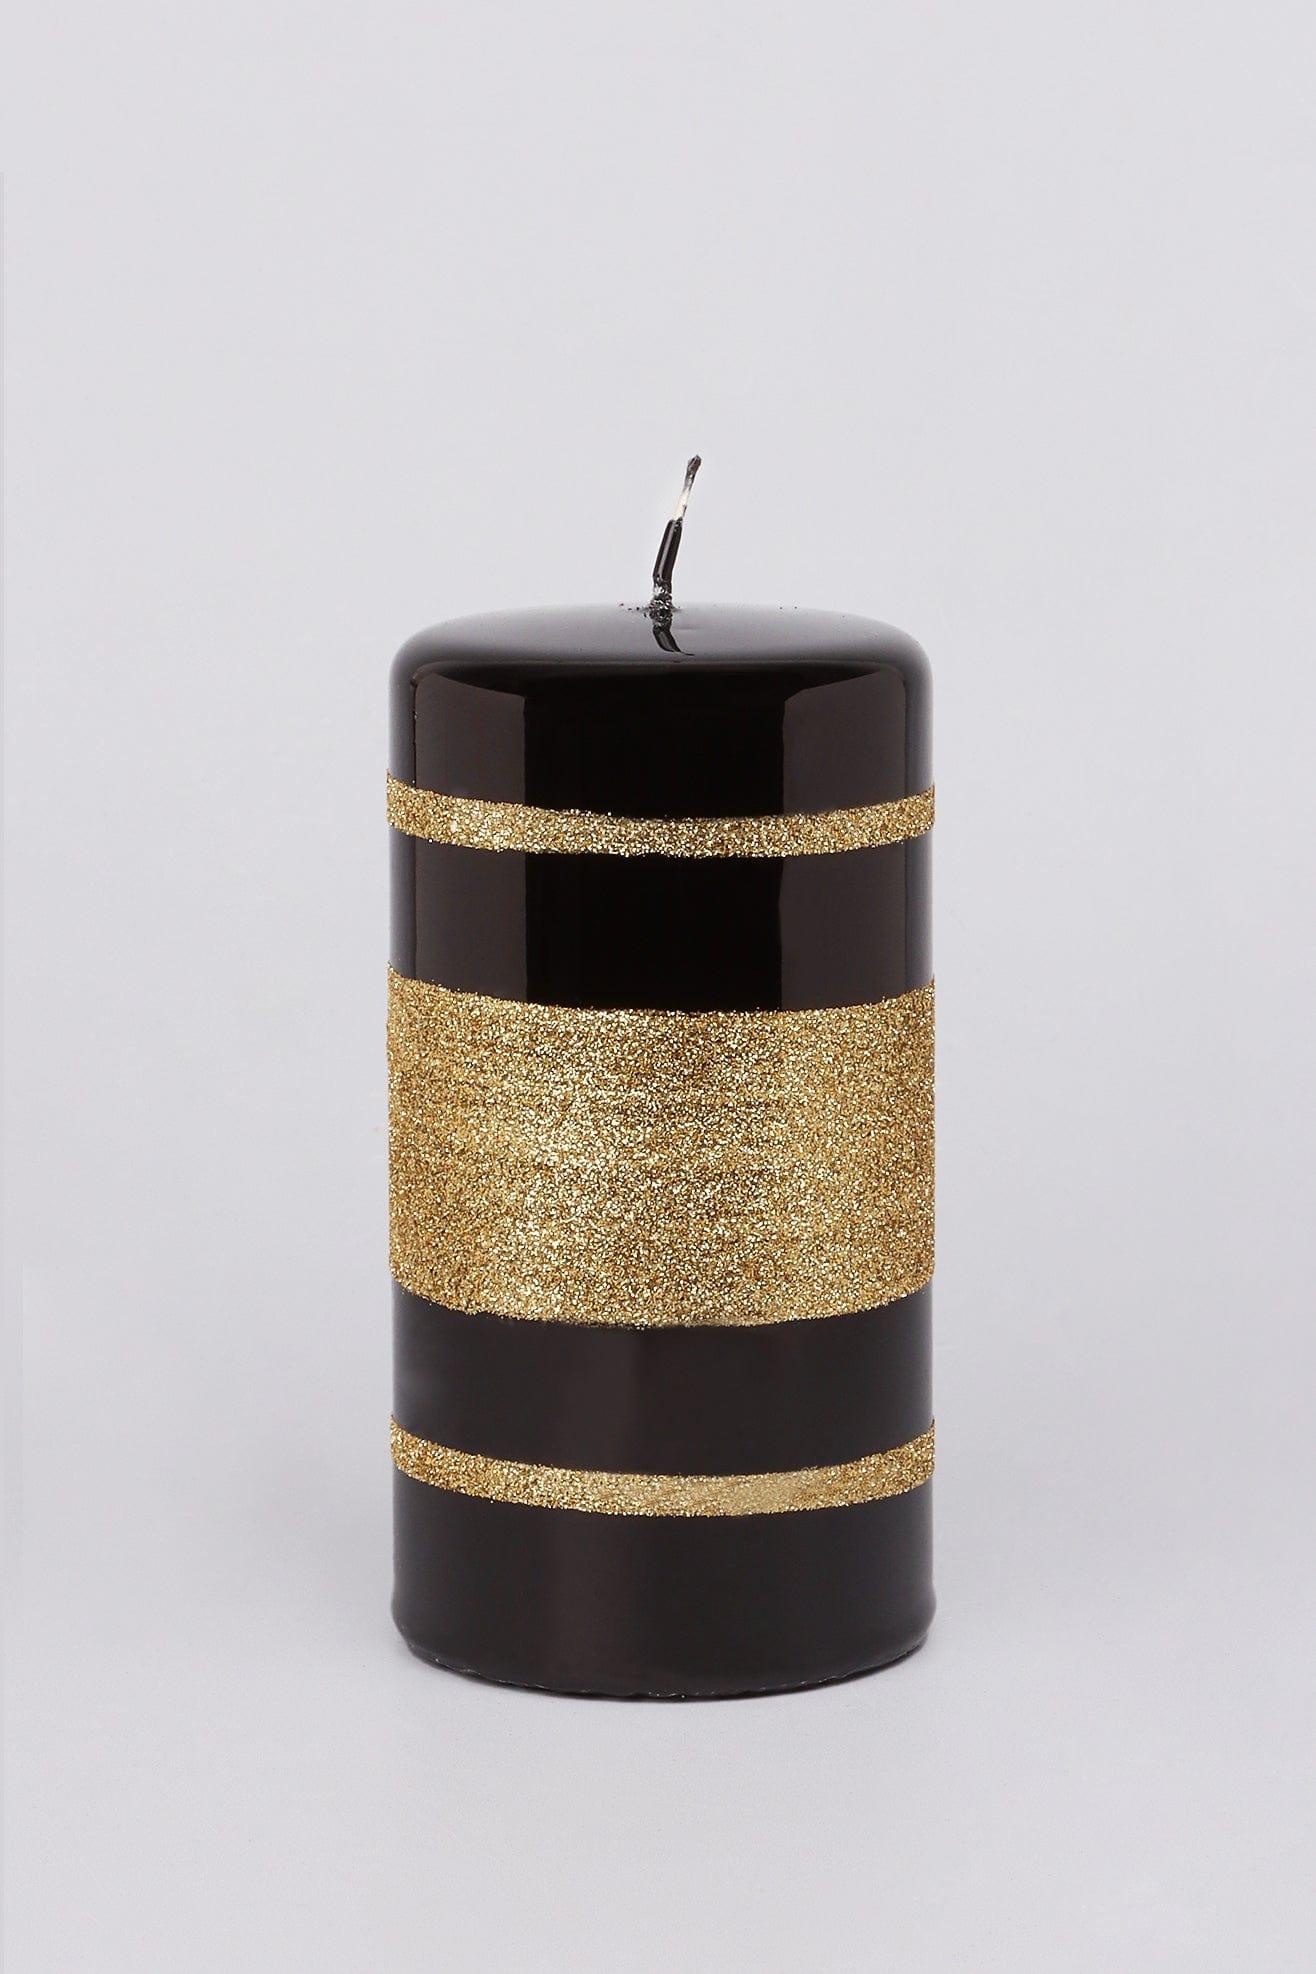 G Decor Candles & Candle Holders Black / Large Pillar Black and Gold Glass Effect Striped Glitter Gloss Ball Pillar Candles